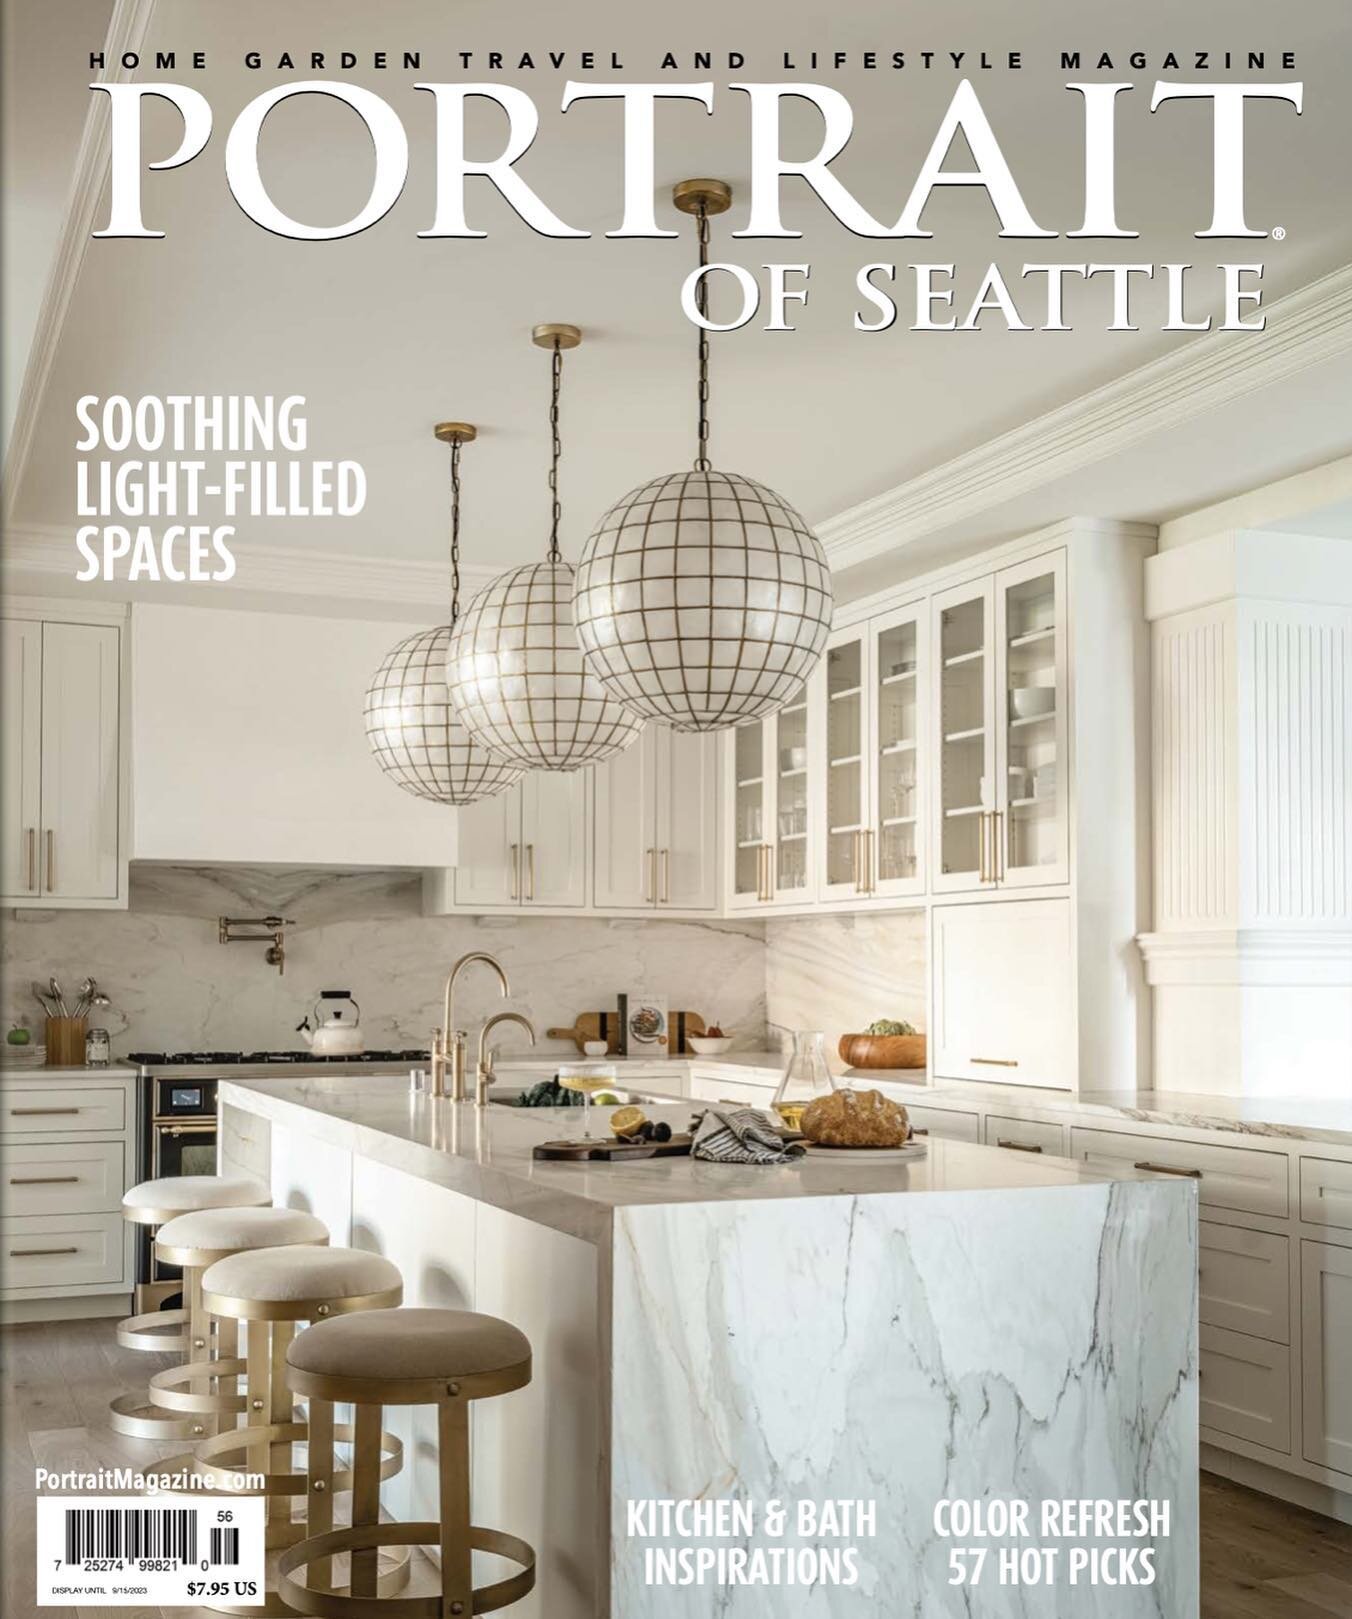 Portrait Magazine did a beautiful 6 page feature inside both of their quarterly Portland &amp; Seattle issues. They also loved my kitchen so much that it made the front cover. What an honor.

Contractor: @remontconstruction 
Photographer: @_karamerce